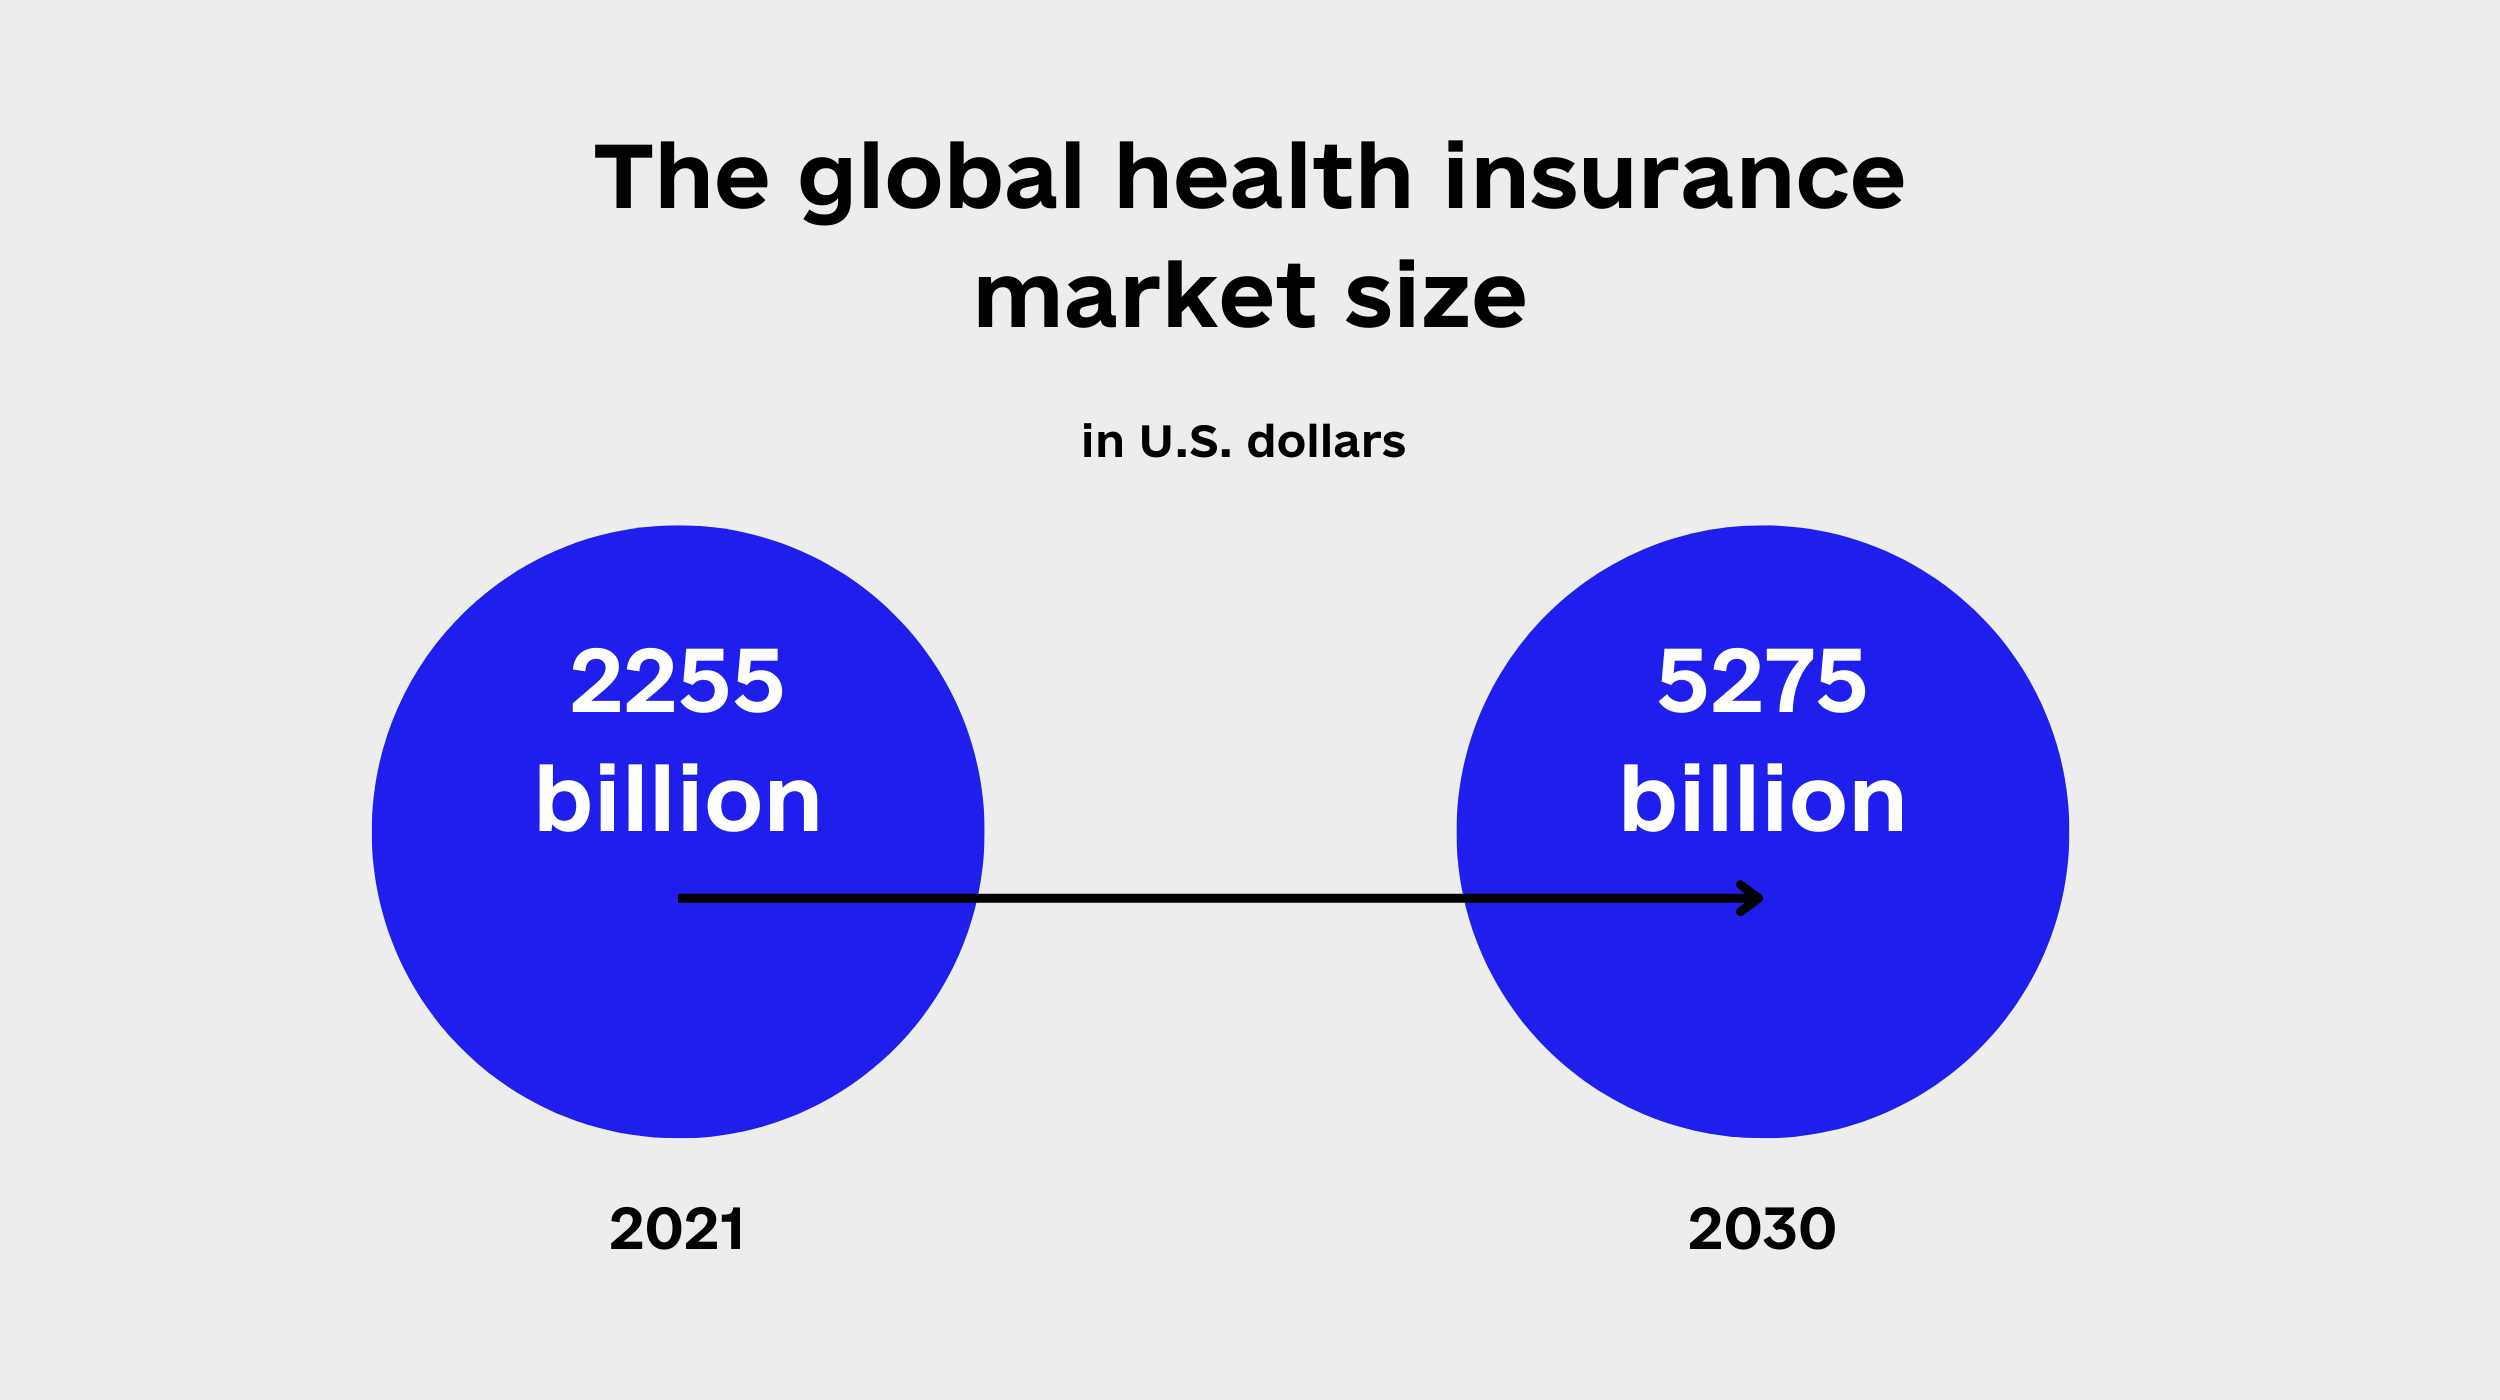 The global health insurance market size